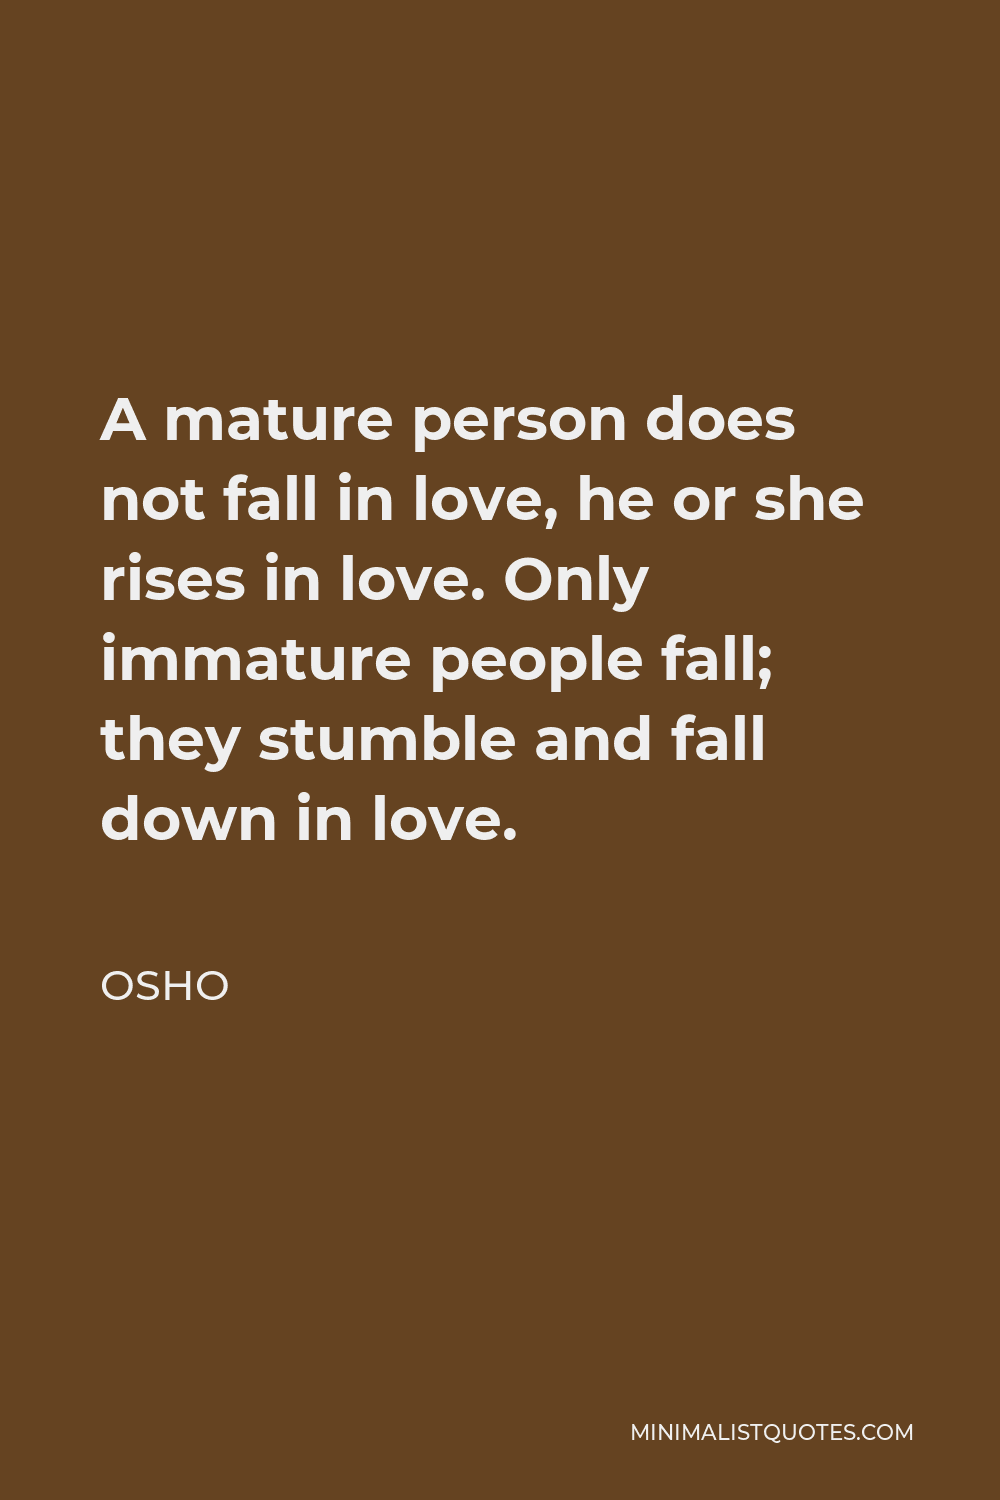 Osho Quote - A mature person does not fall in love, he or she rises in love. Only immature people fall; they stumble and fall down in love.